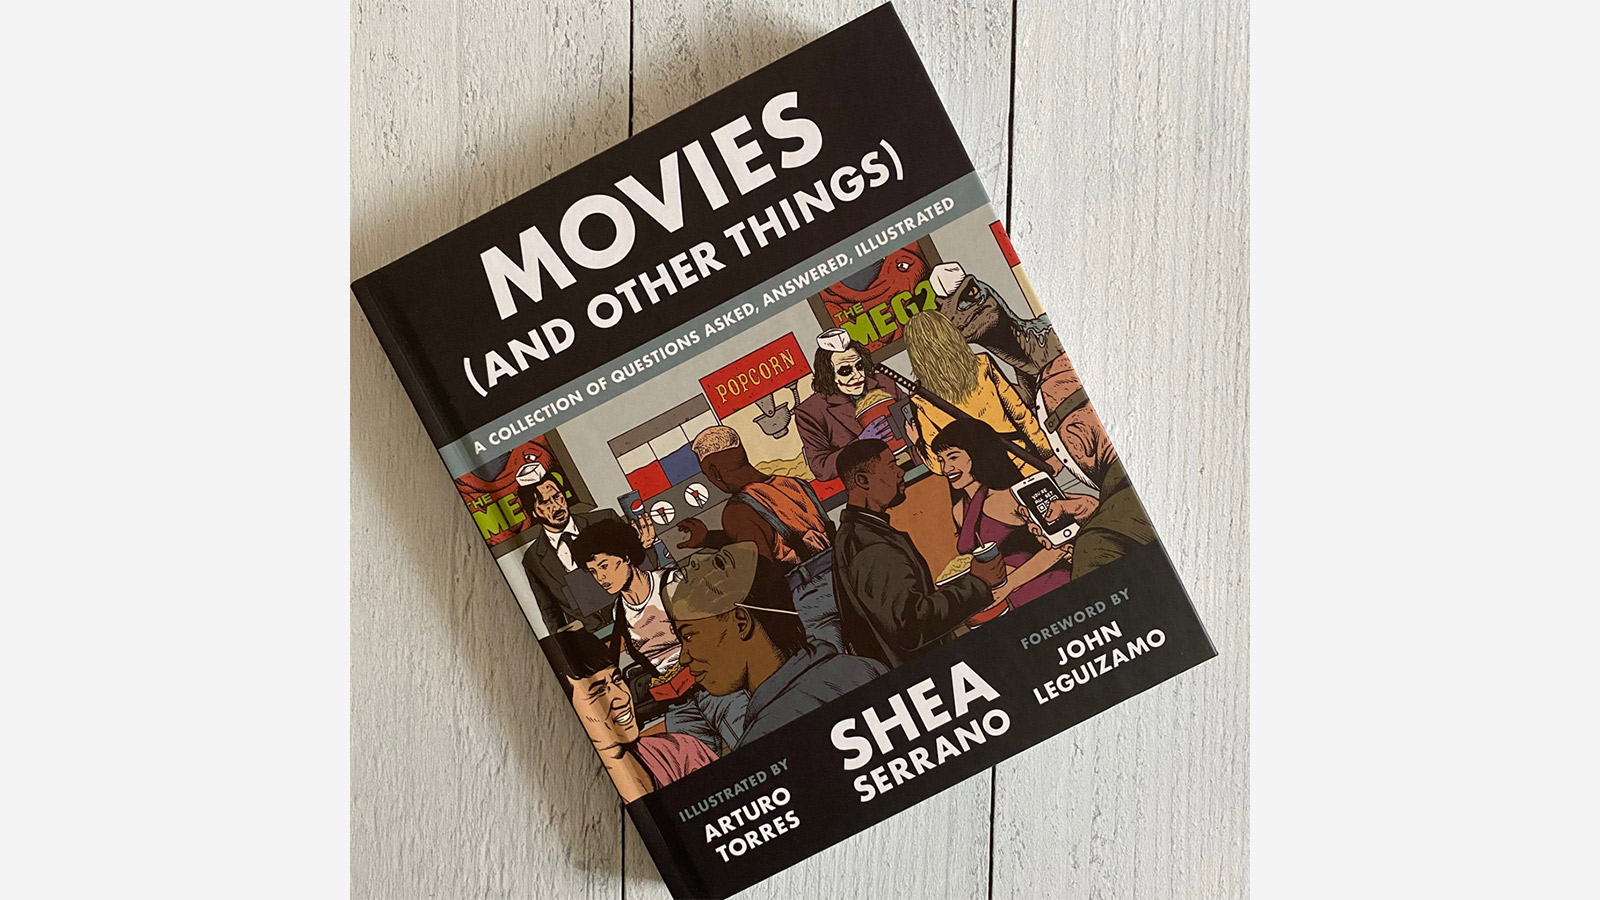 Movies (and other things) by Shea Serrano